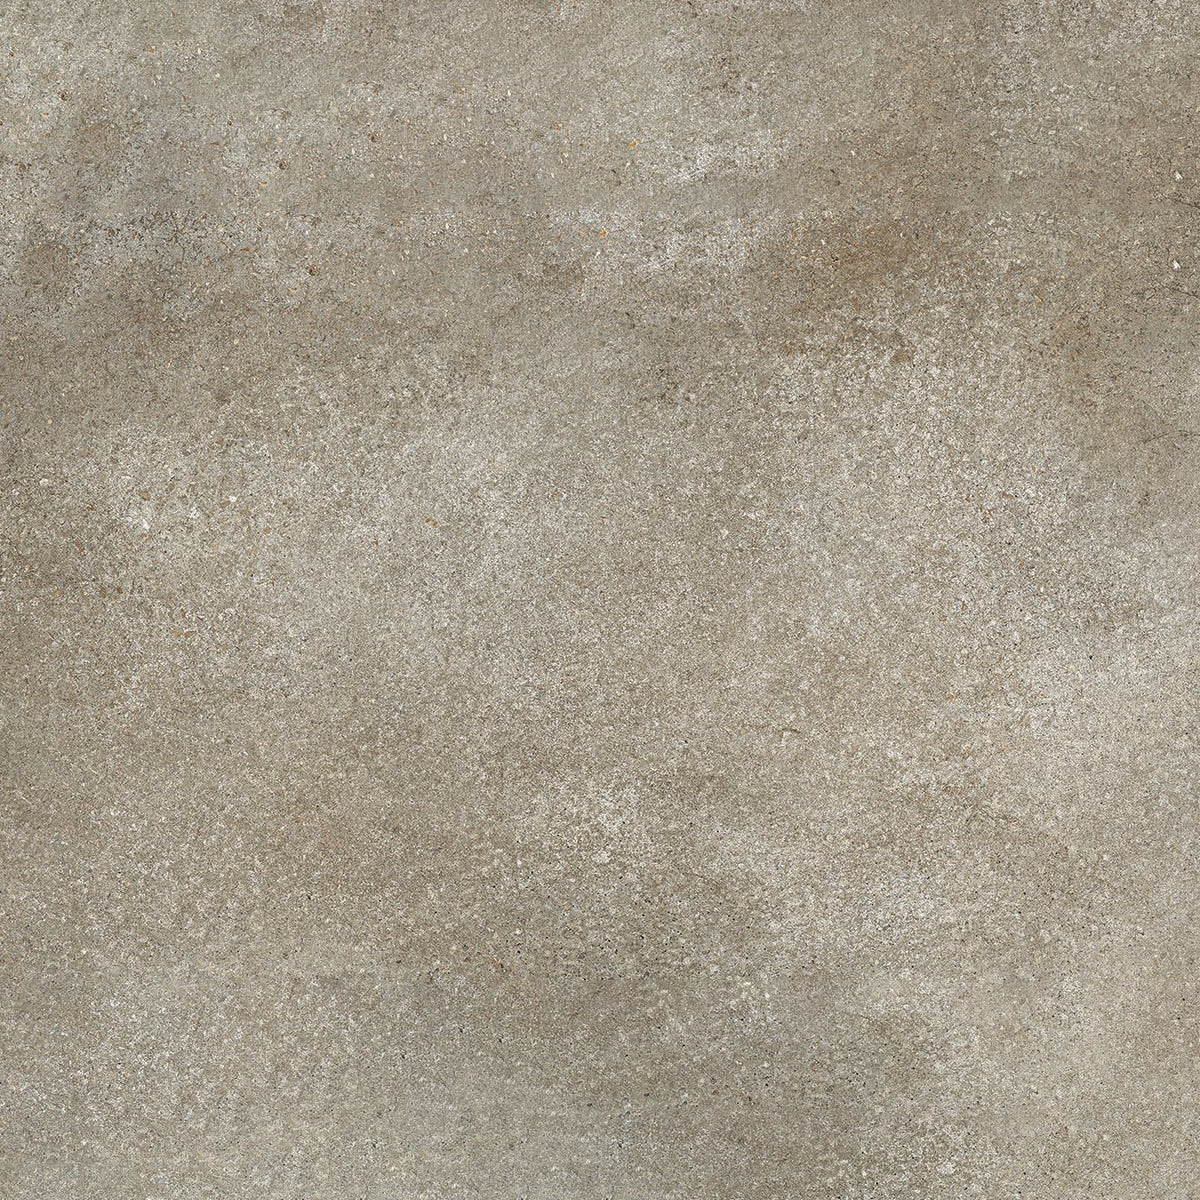 Bedstuy-Cemento Taupe Porcelain SAMPLE